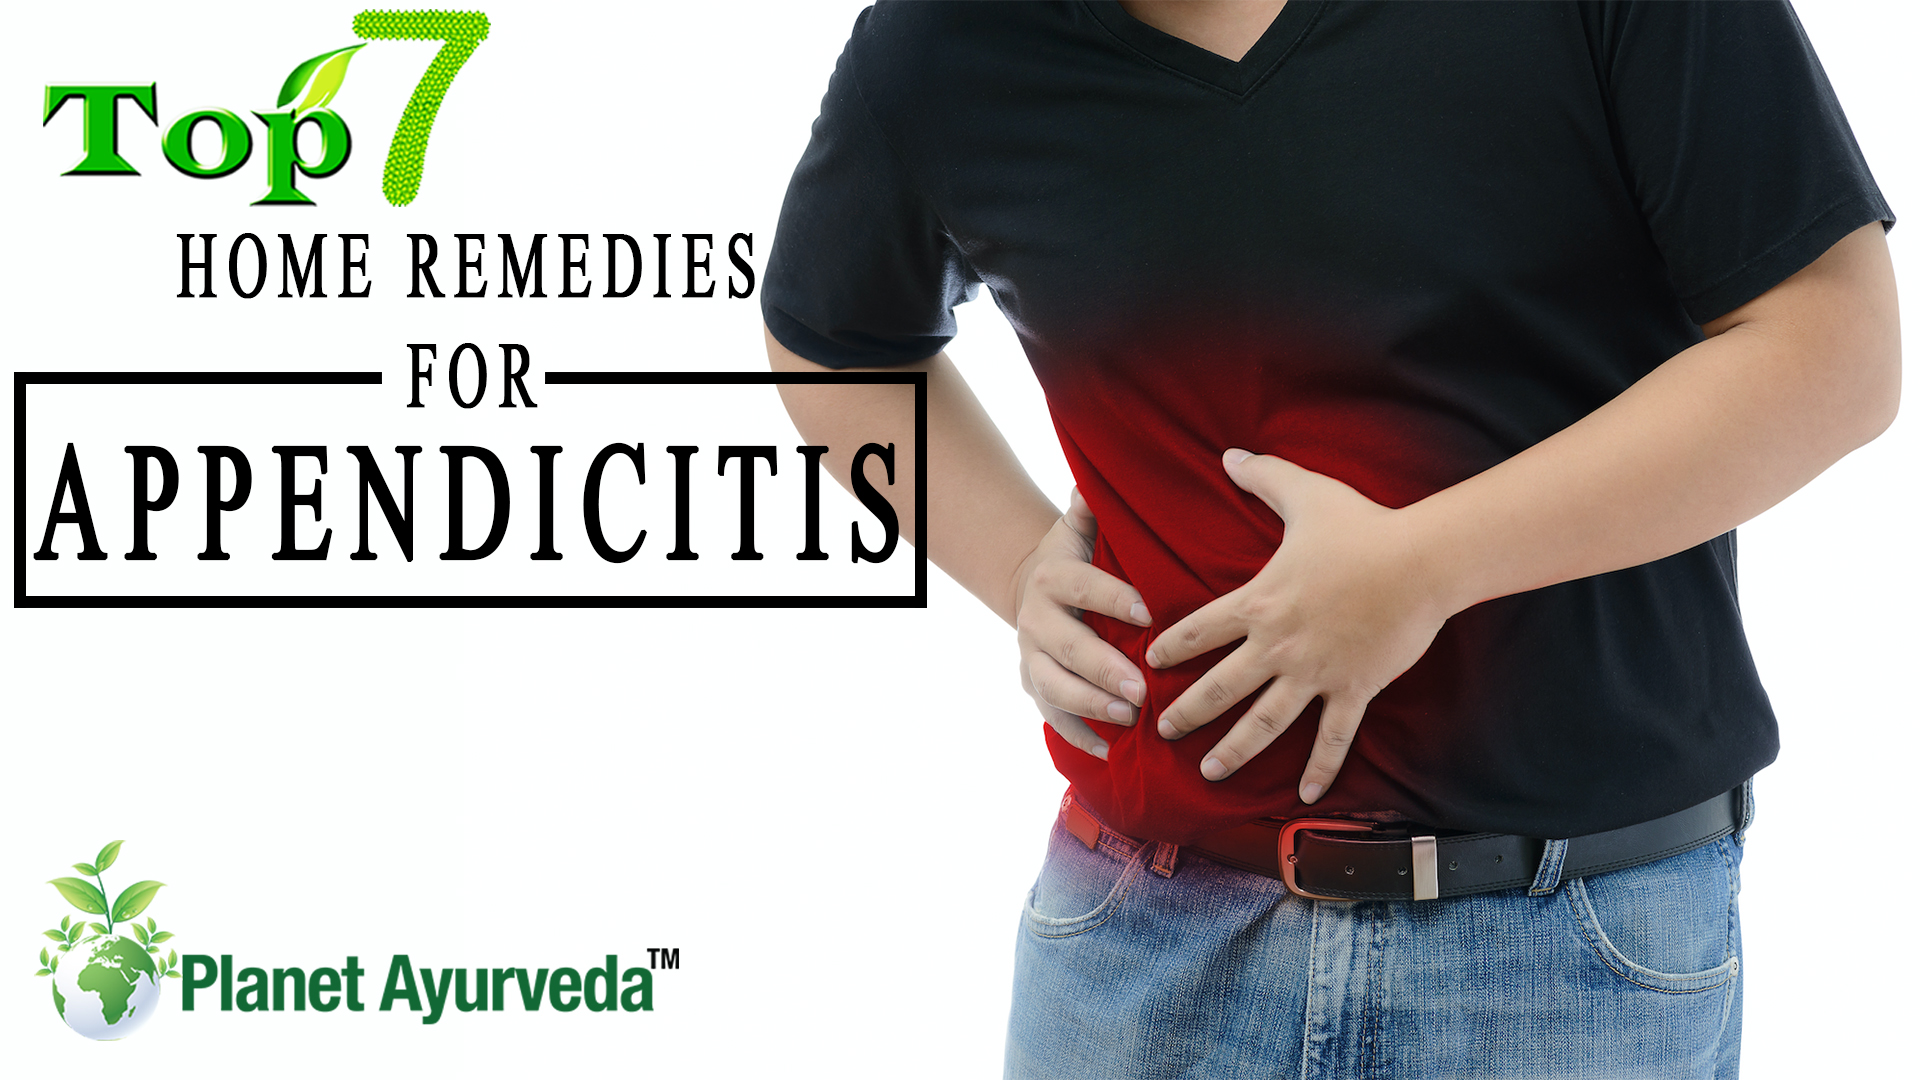 Top 7 Home Remedies for Appendicitis